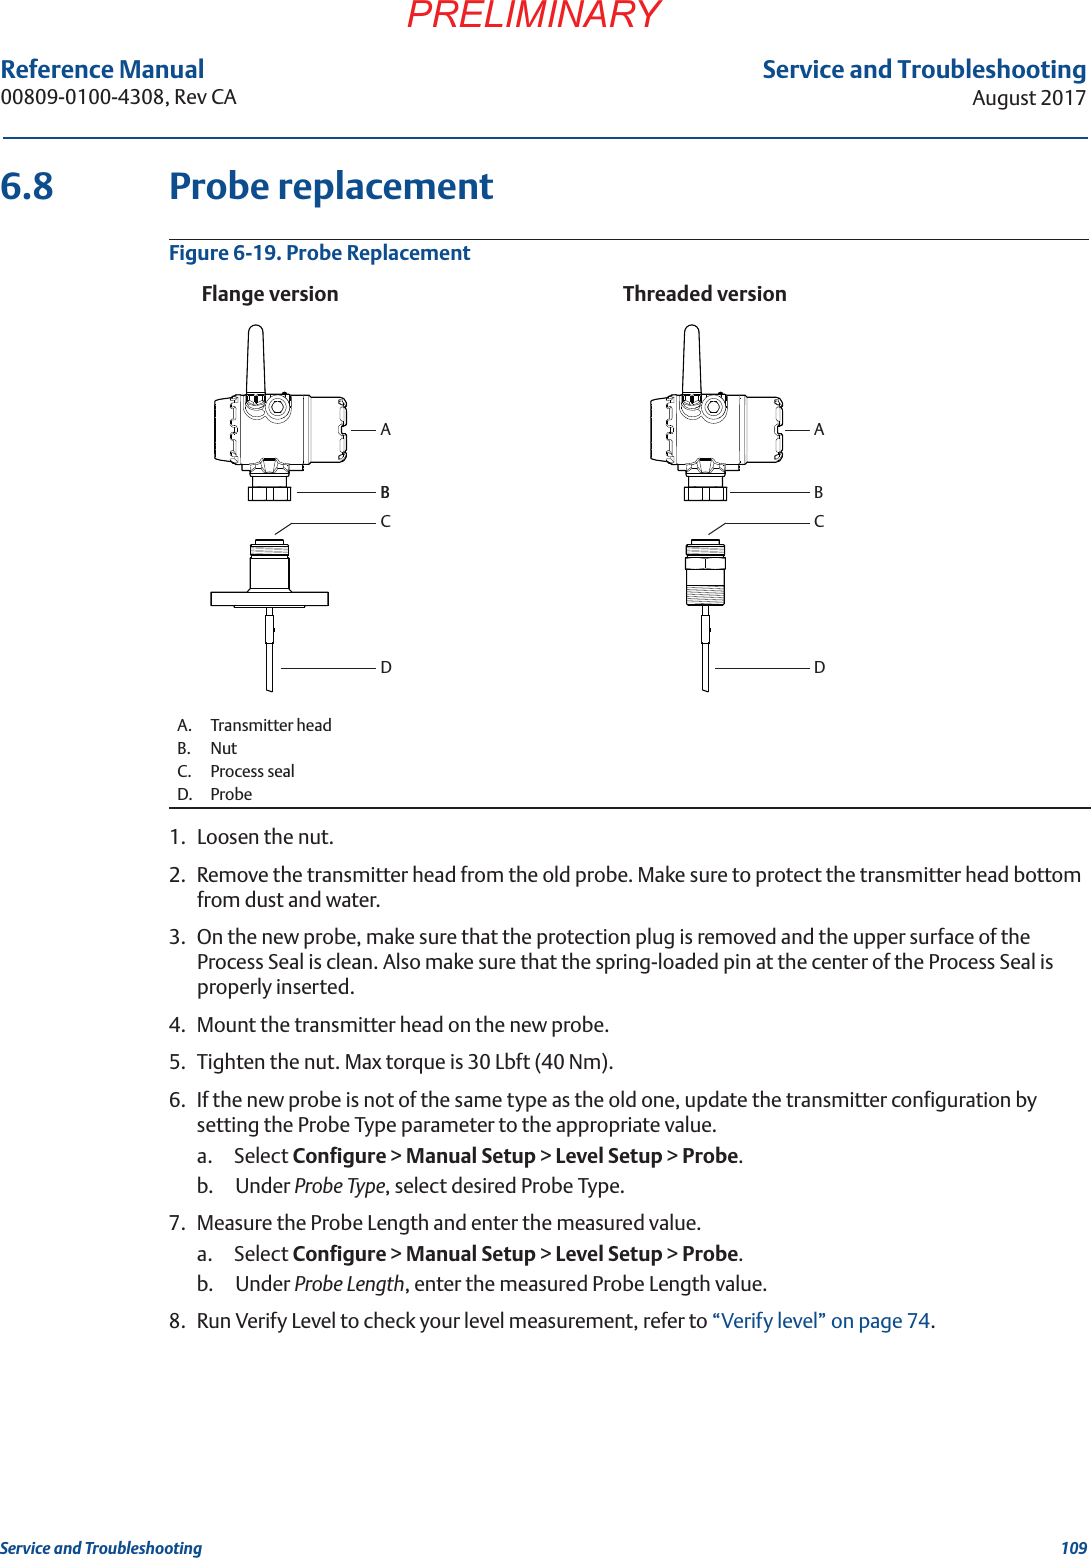 109Service and TroubleshootingAugust 2017Service and TroubleshootingPRELIMINARYReference Manual 00809-0100-4308, Rev CA6.8 Probe replacementFigure 6-19. Probe Replacement1. Loosen the nut.2. Remove the transmitter head from the old probe. Make sure to protect the transmitter head bottom from dust and water.3. On the new probe, make sure that the protection plug is removed and the upper surface of the Process Seal is clean. Also make sure that the spring-loaded pin at the center of the Process Seal is properly inserted.4. Mount the transmitter head on the new probe.5. Tighten the nut. Max torque is 30 Lbft (40 Nm).6. If the new probe is not of the same type as the old one, update the transmitter configuration by setting the Probe Type parameter to the appropriate value. a. Select Configure &gt; Manual Setup &gt; Level Setup &gt; Probe.b. Under Probe Type, select desired Probe Type.7. Measure the Probe Length and enter the measured value.a. Select Configure &gt; Manual Setup &gt; Level Setup &gt; Probe.b. Under Probe Length, enter the measured Probe Length value.8. Run Verify Level to check your level measurement, refer to “Verify level” on page 74.A. Transmitter headB. NutC. Process sealD. ProbeThreaded versionBFlange versionCABDCABD